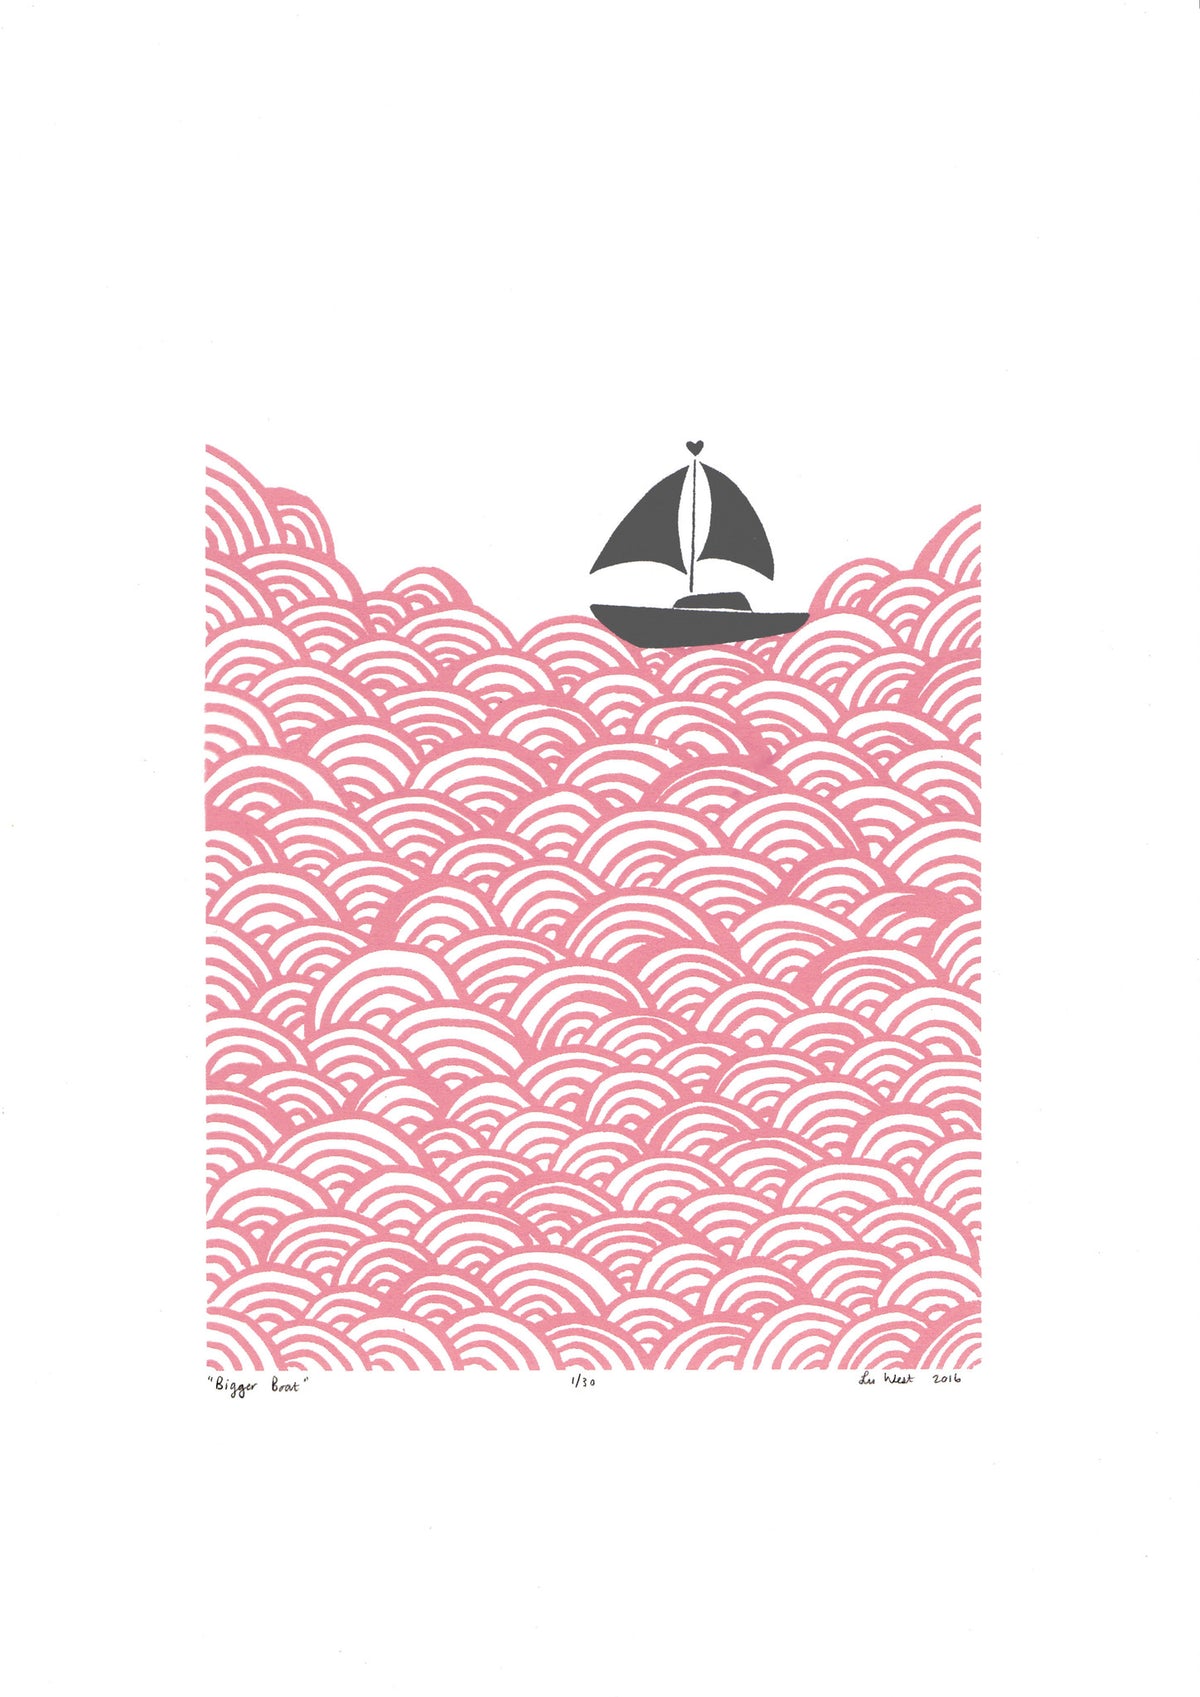 Limited edition print of a little yacht sailing the big blue. The beautiful simplicity of this graphic pastel pink Scandinavian coastal landscape is fresh and fun.